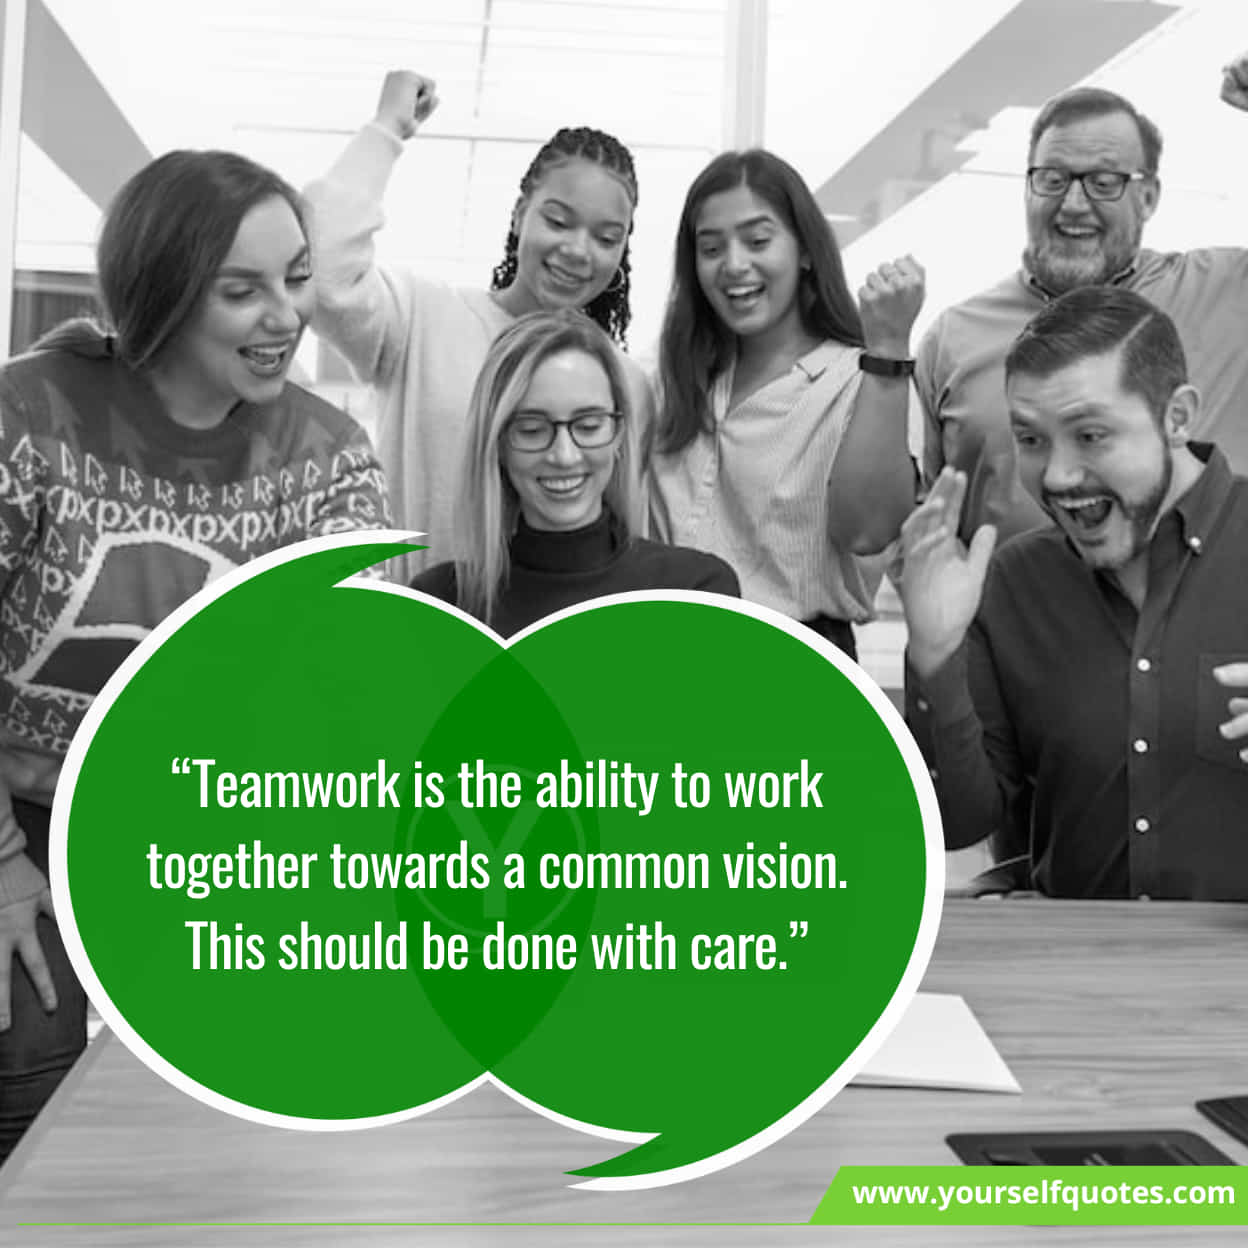 Teamwork Quotes Messages